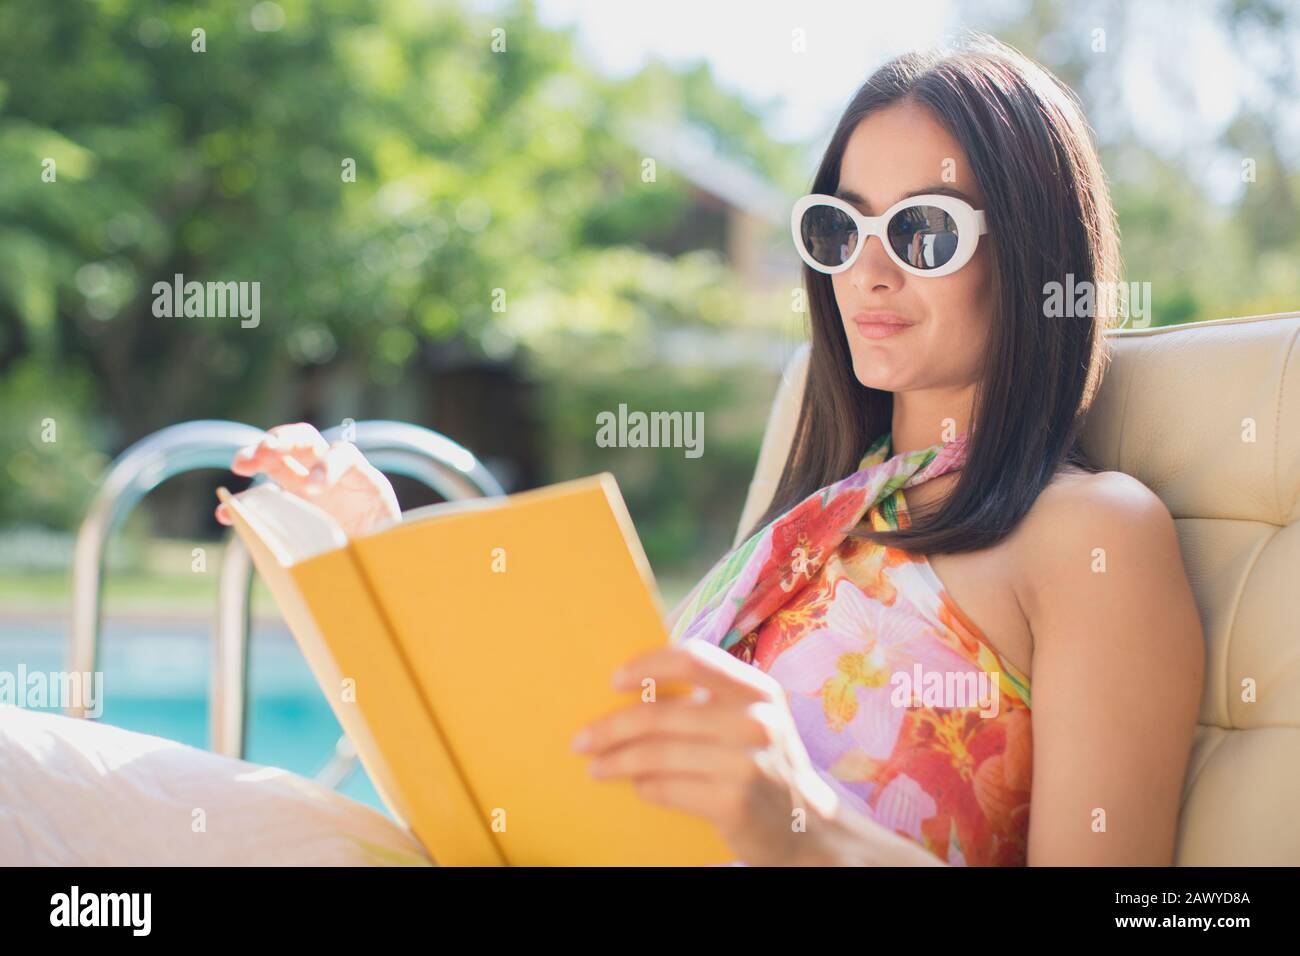 Woman in sunglasses reading book at sunny summer poolside Stock Photo